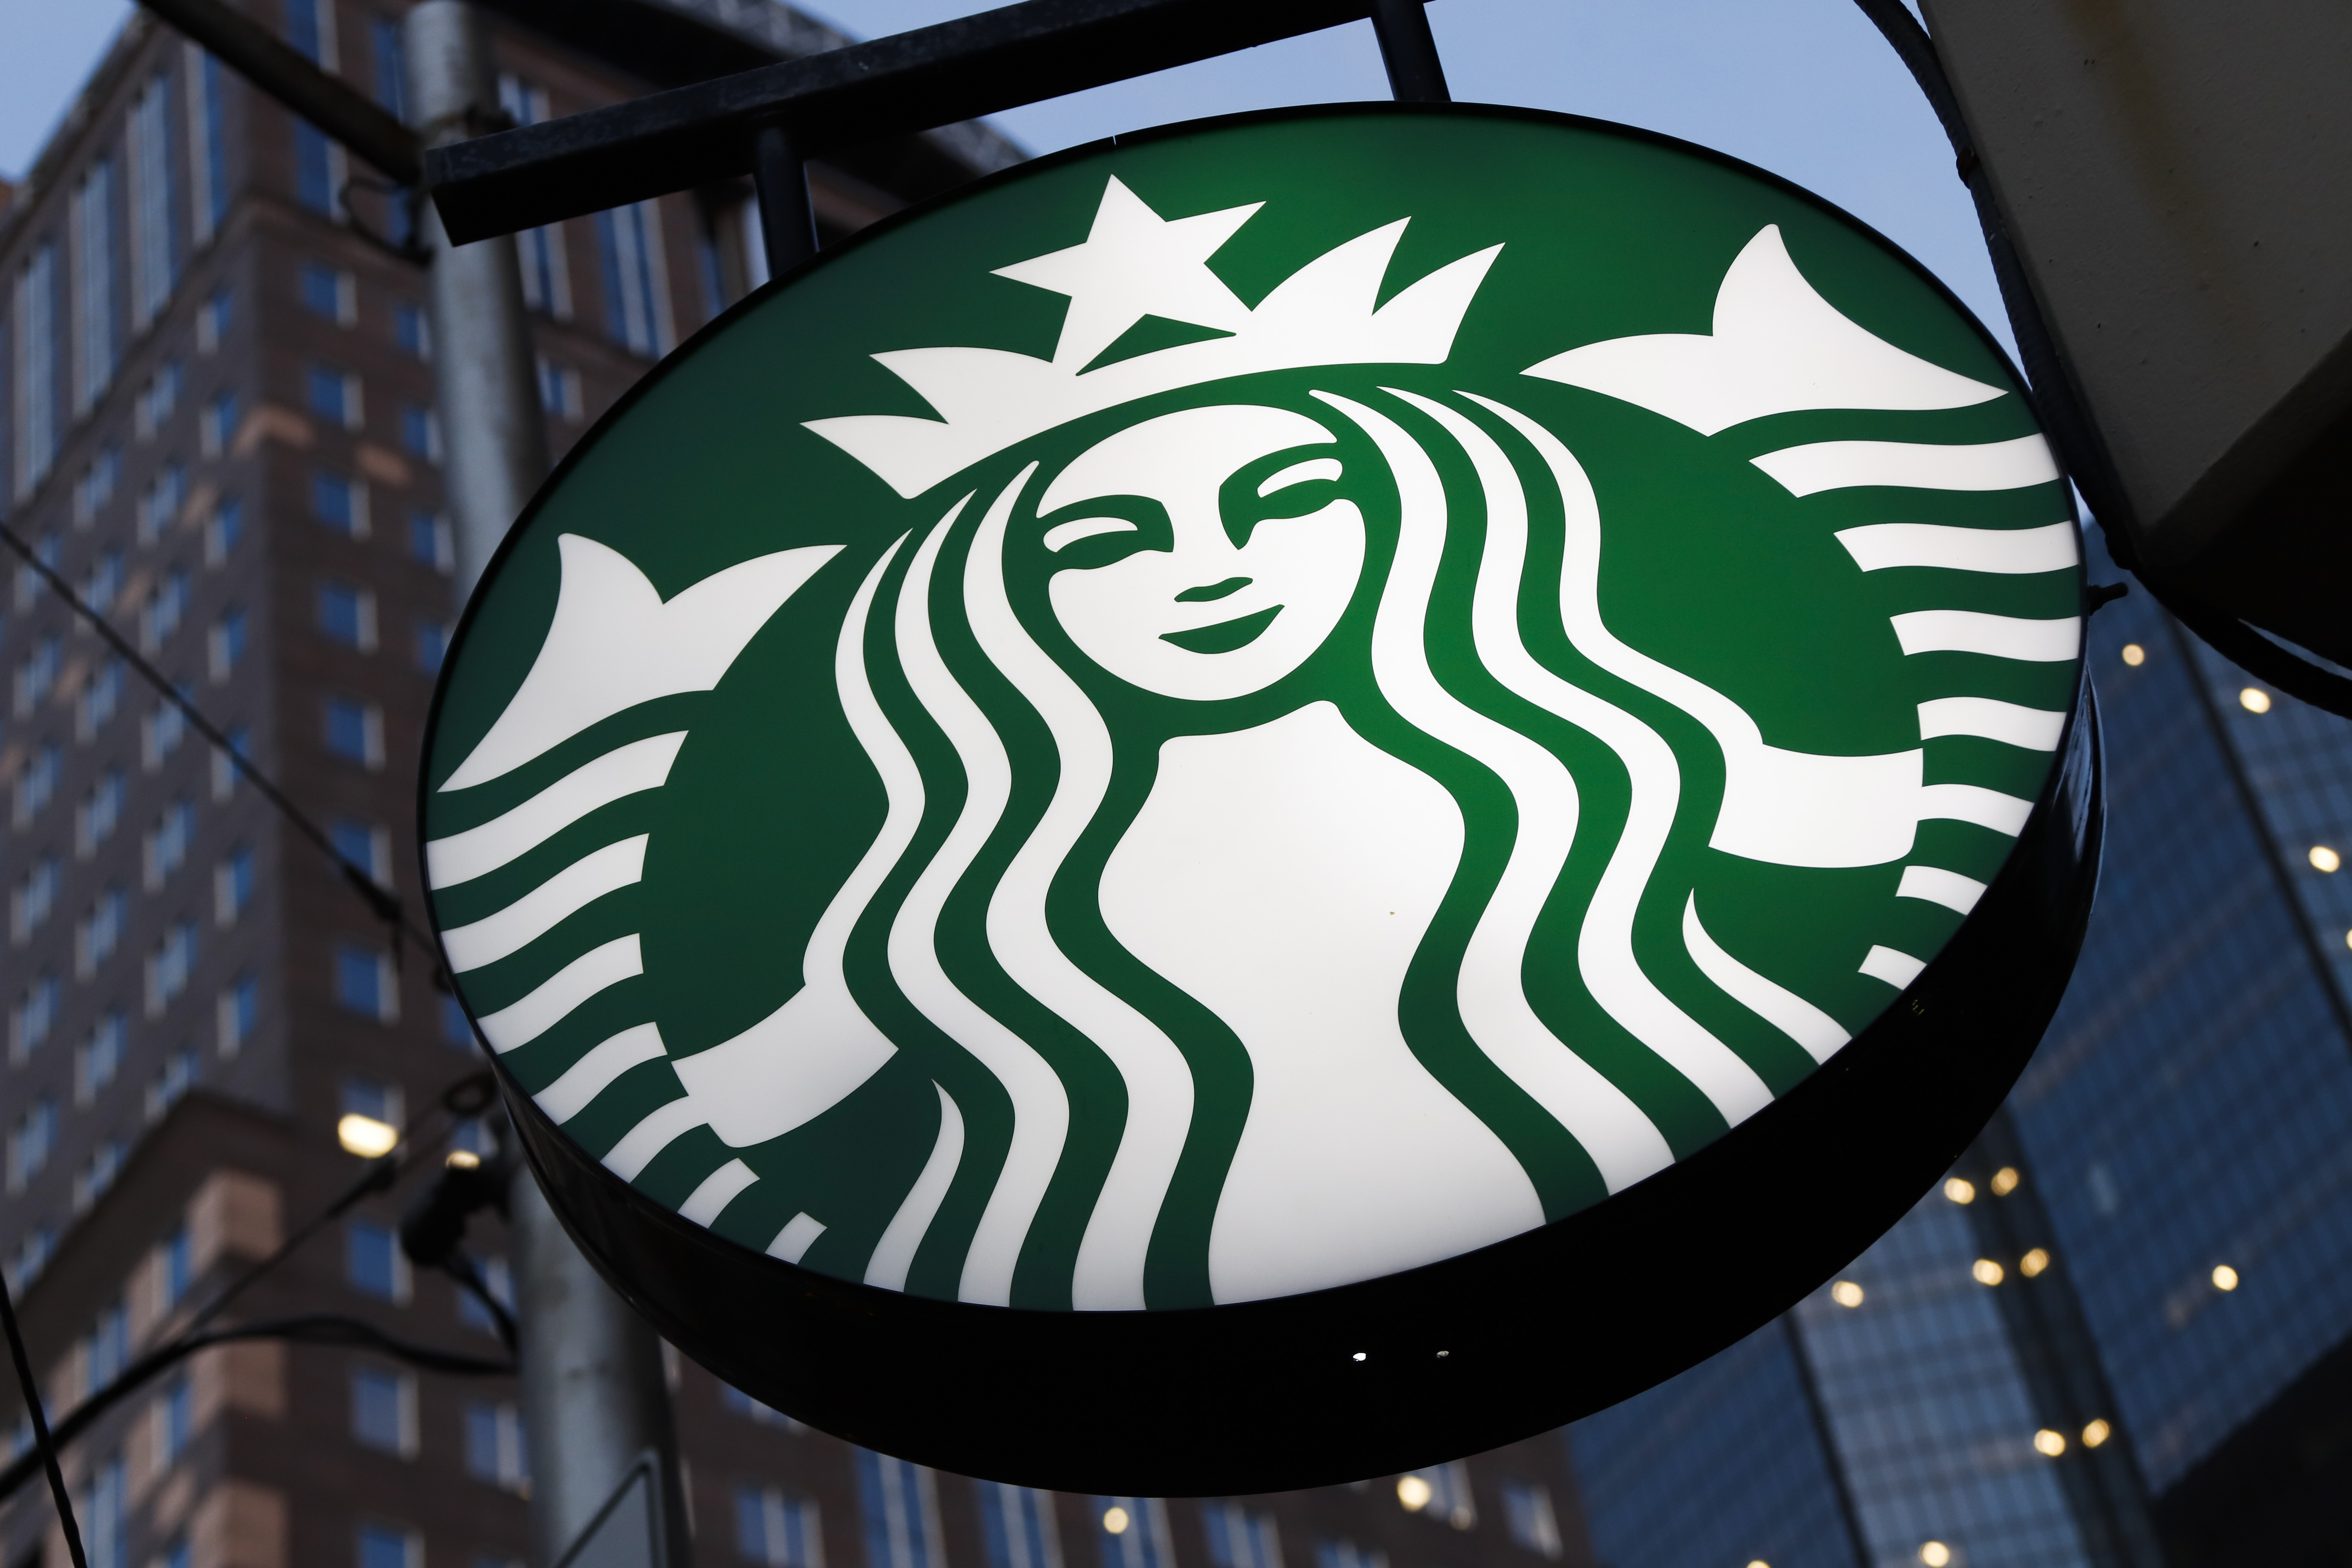 This is the Starbucks sign outside a Starbucks coffee shop in downtown Pittsburgh on Wednesday, June 26, 2019. (AP Photo/Gene J. Puskar)